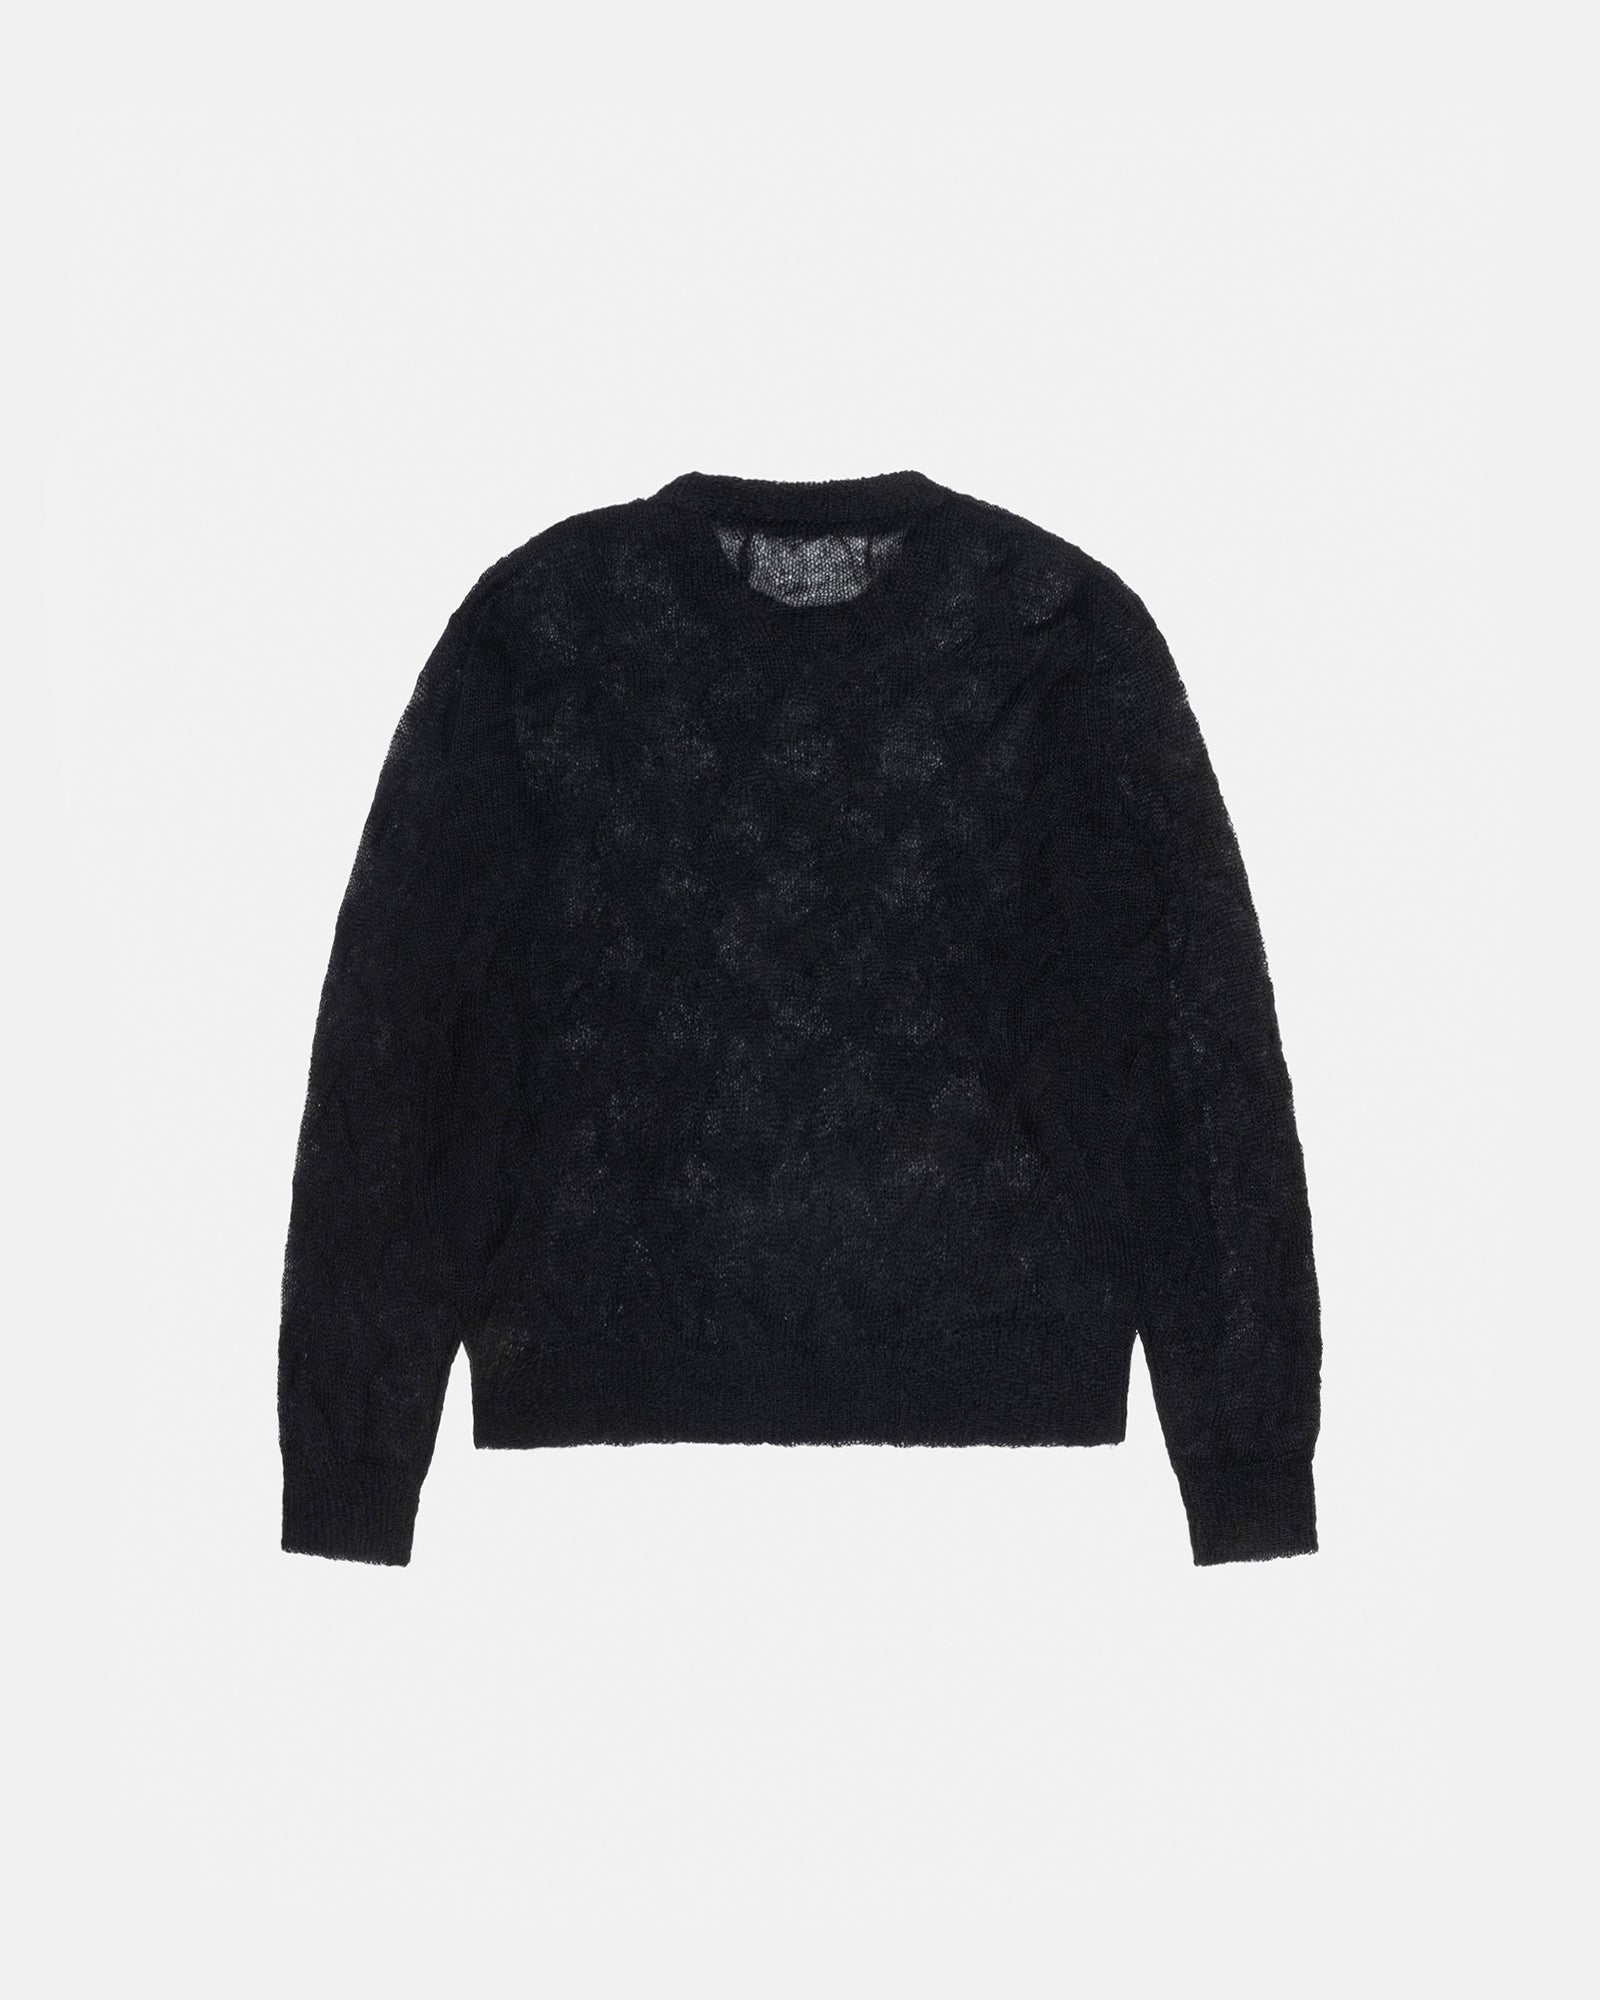 STÜSSY LOOSE KNIT CROSS CABLE SWEATER BLACK SWEATER